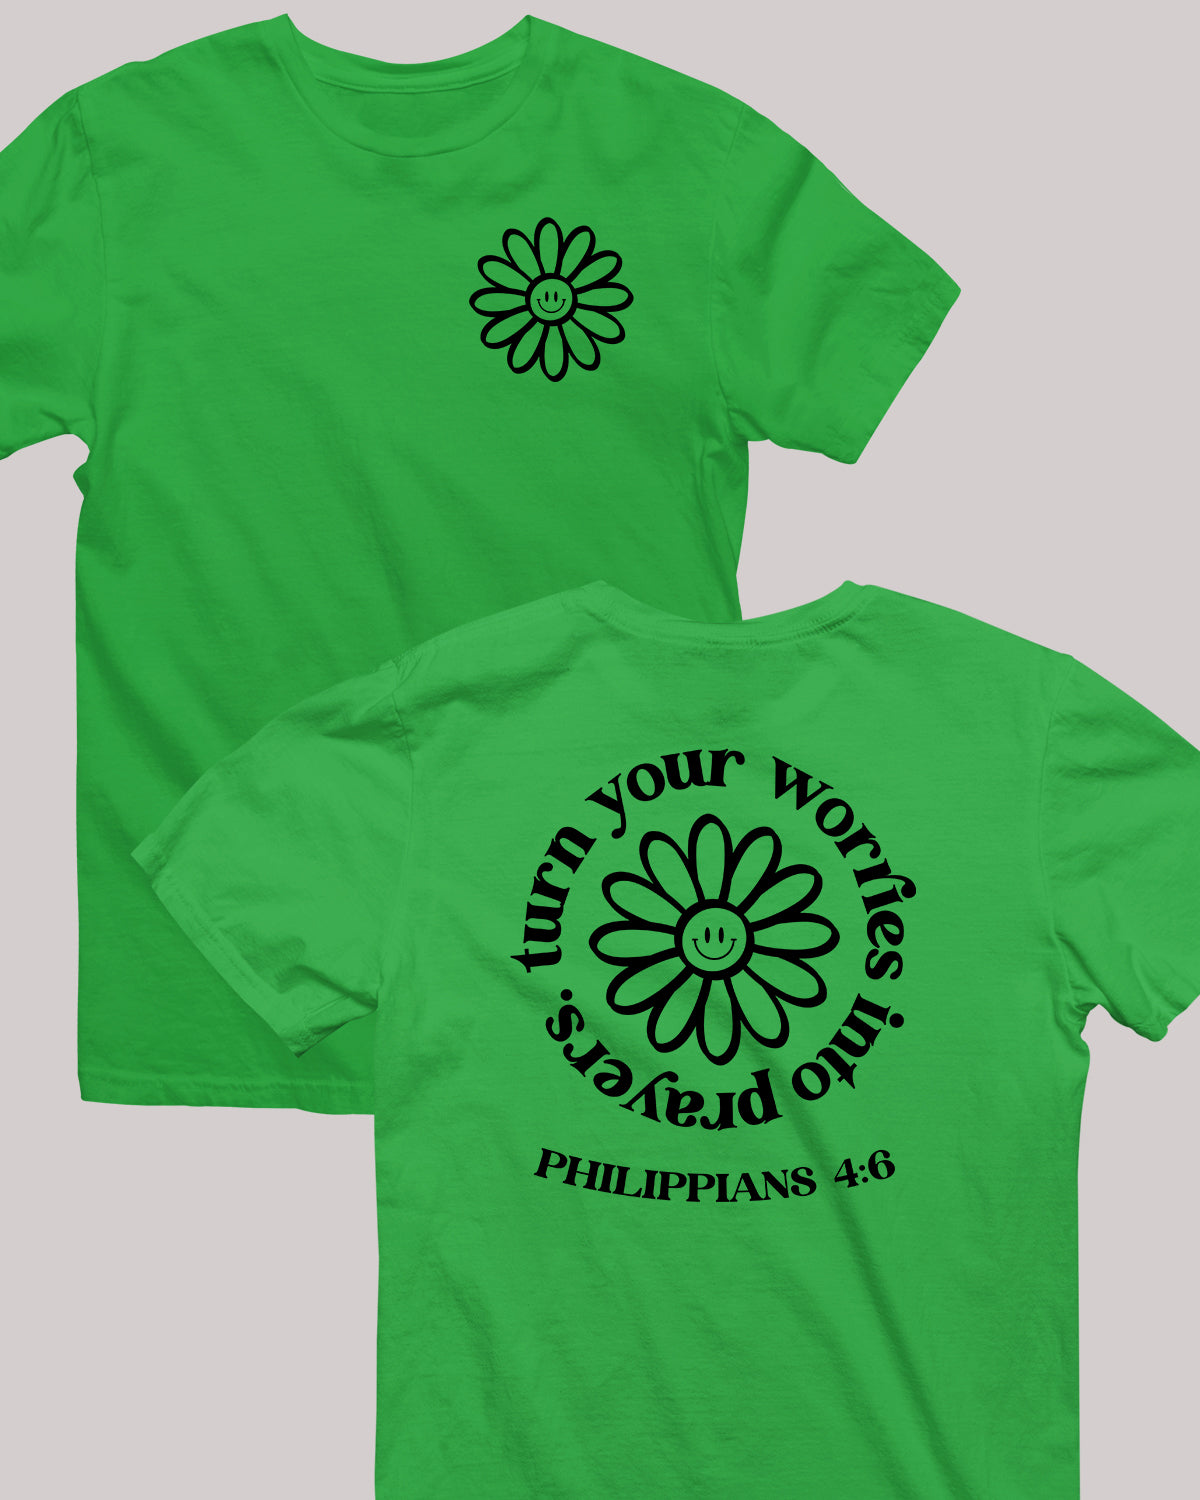 Turn Your Worries Into Prayer scripture verse t shirts Flower Front Back Trendy Vintage Tees